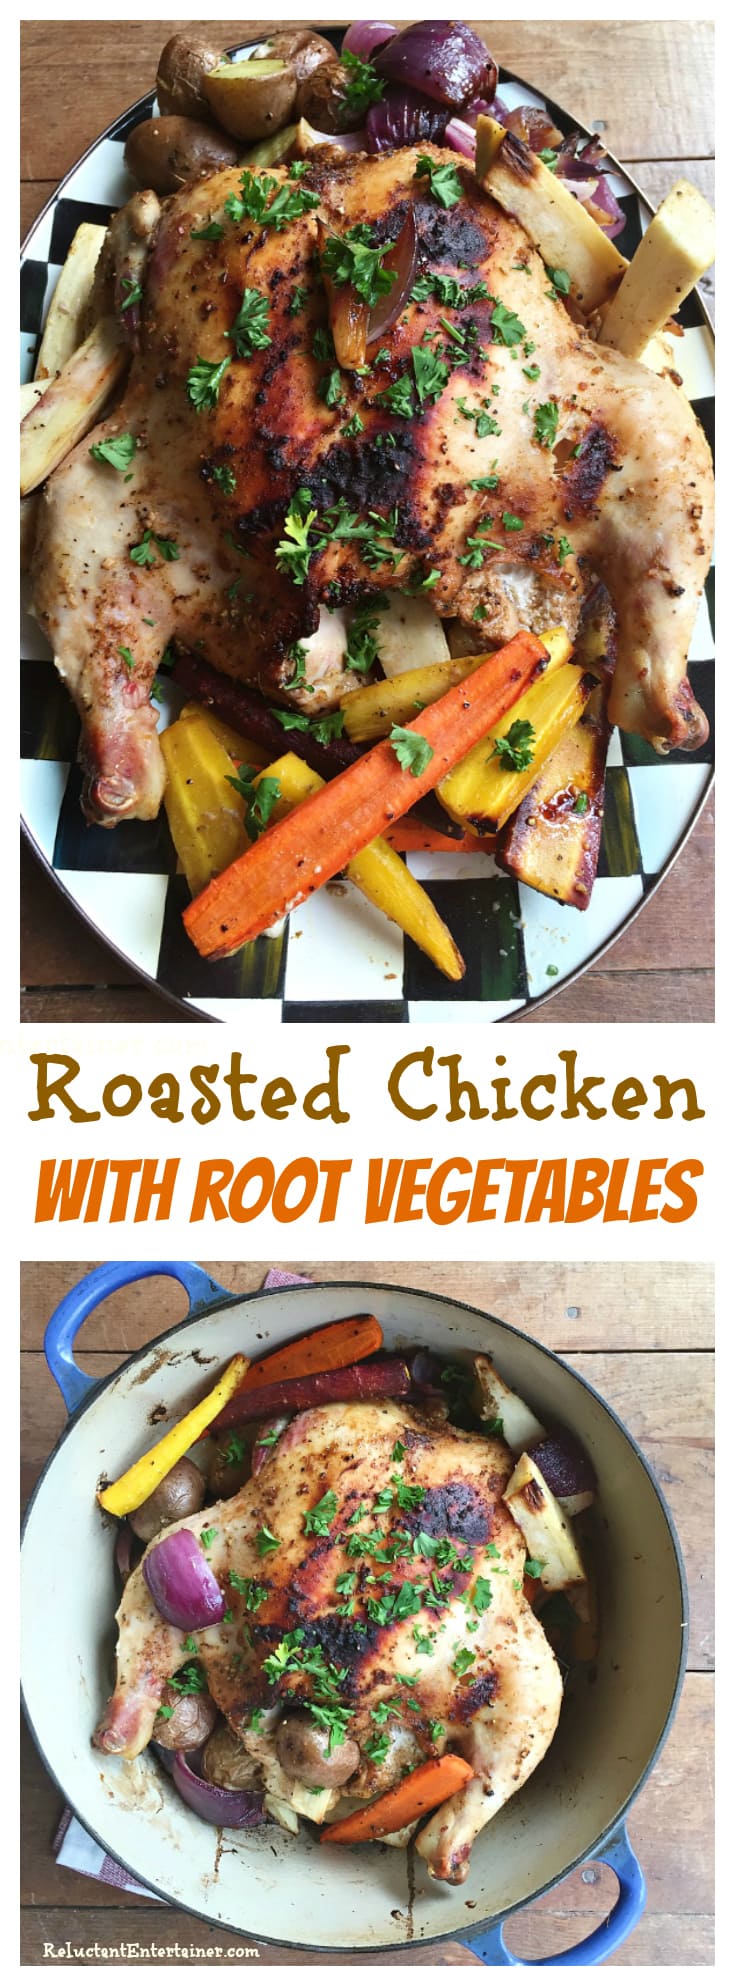 Roasted Chicken with Root Vegetables at ReluctantEntertainer.com